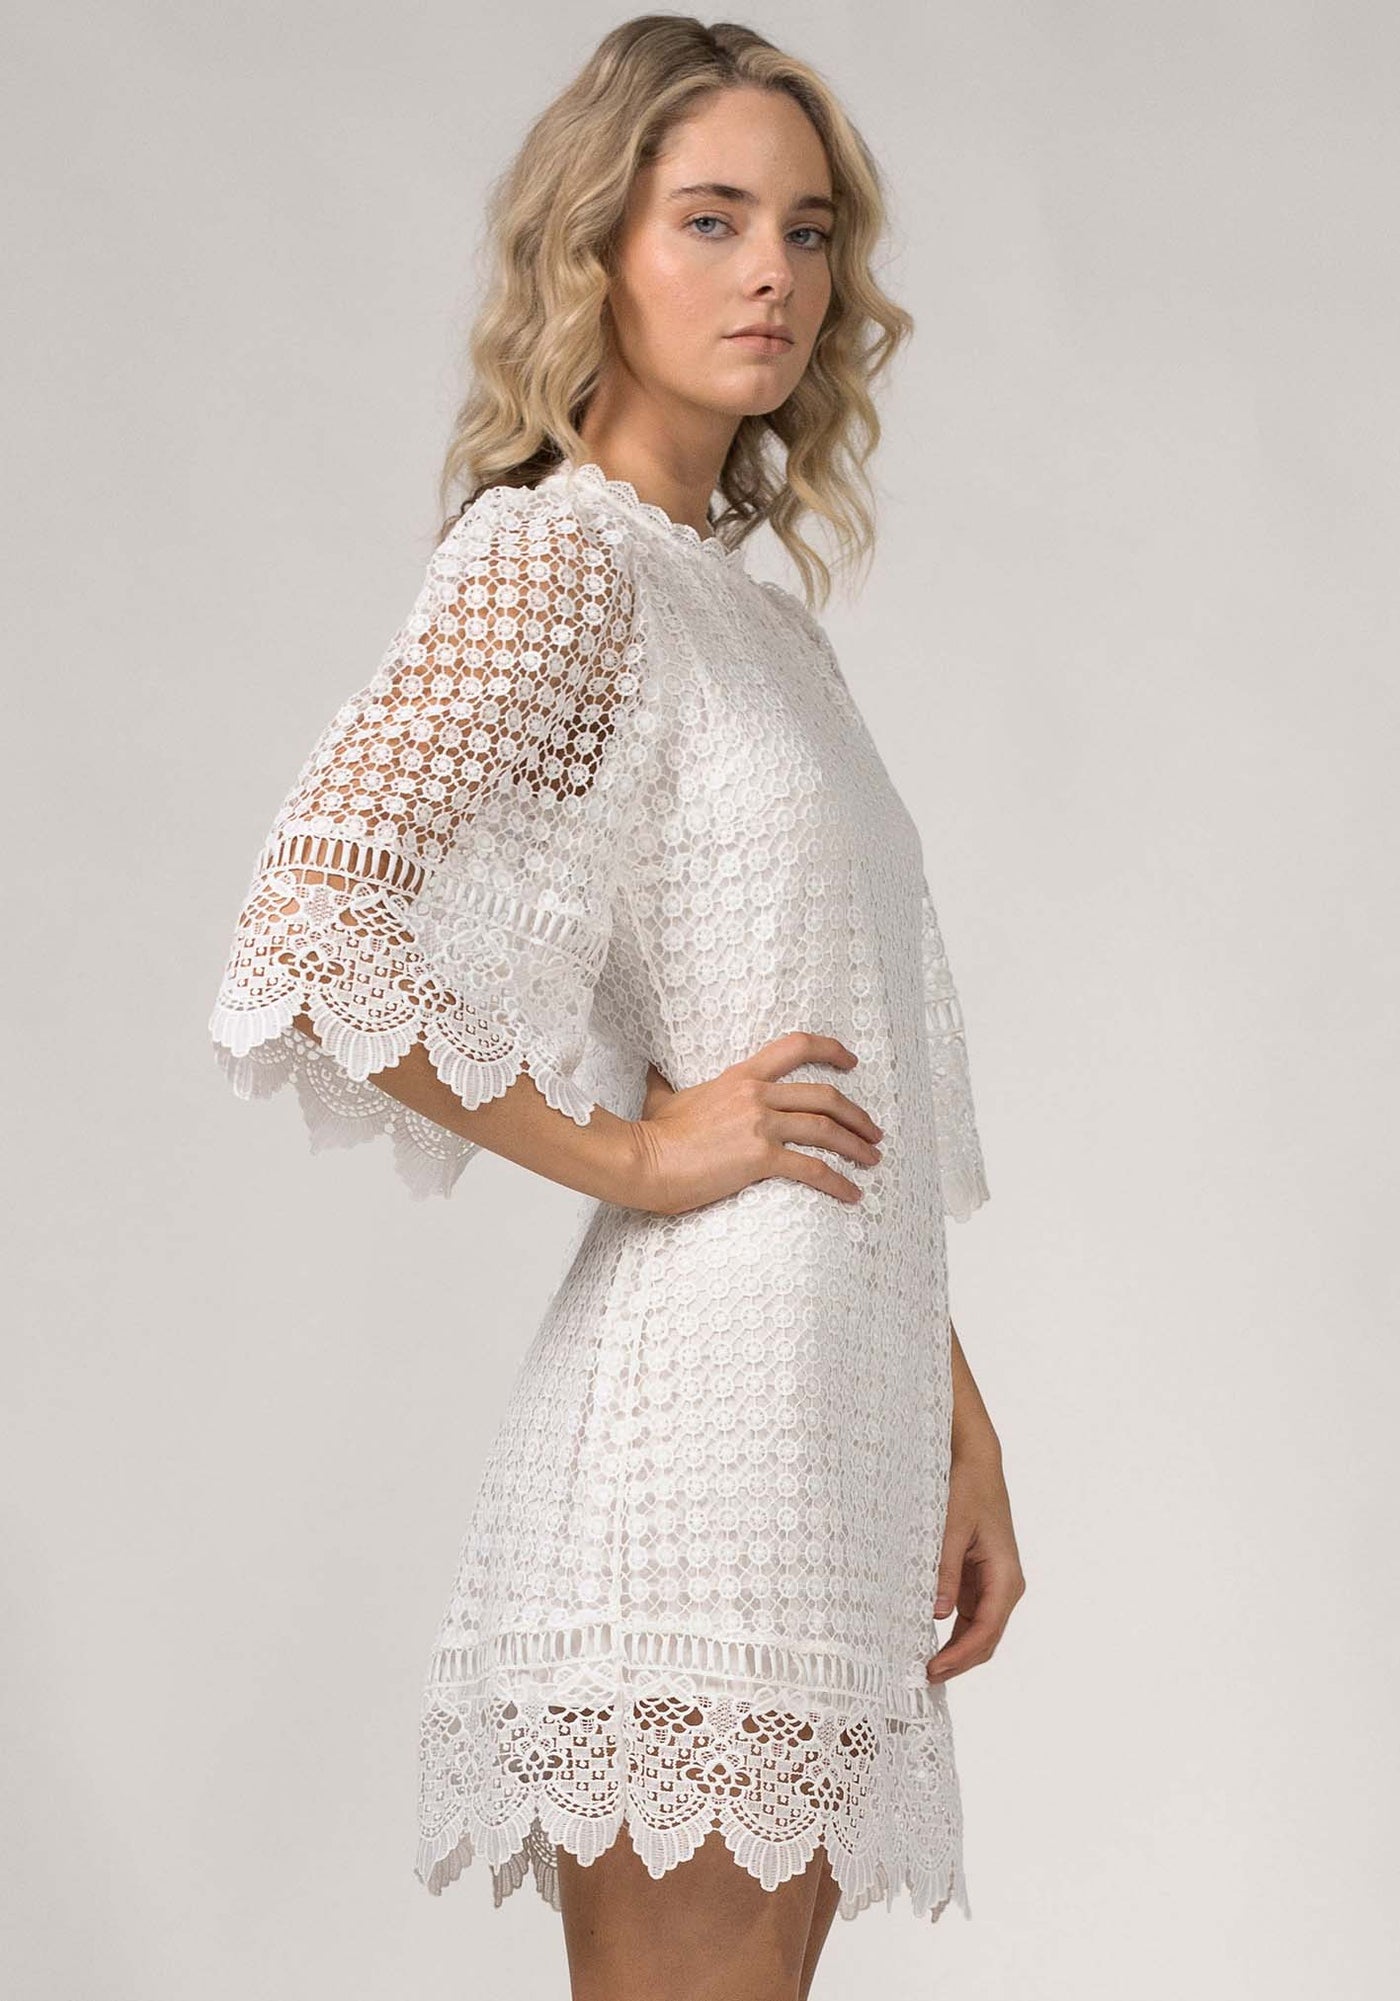 Moment by Moment Lace Dress | White Lace Dress by Three of Something Australia